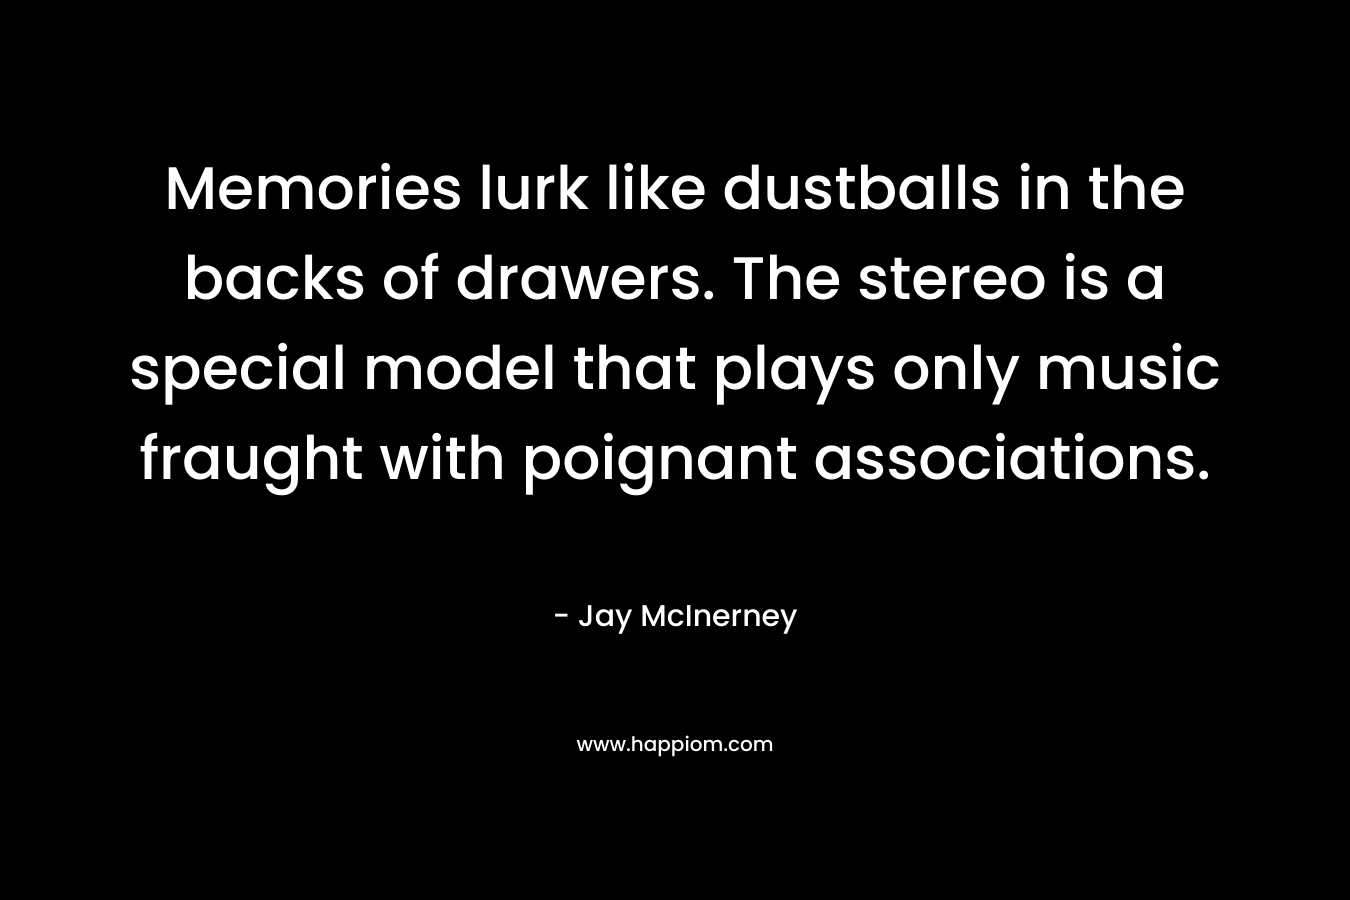 Memories lurk like dustballs in the backs of drawers. The stereo is a special model that plays only music fraught with poignant associations. – Jay McInerney